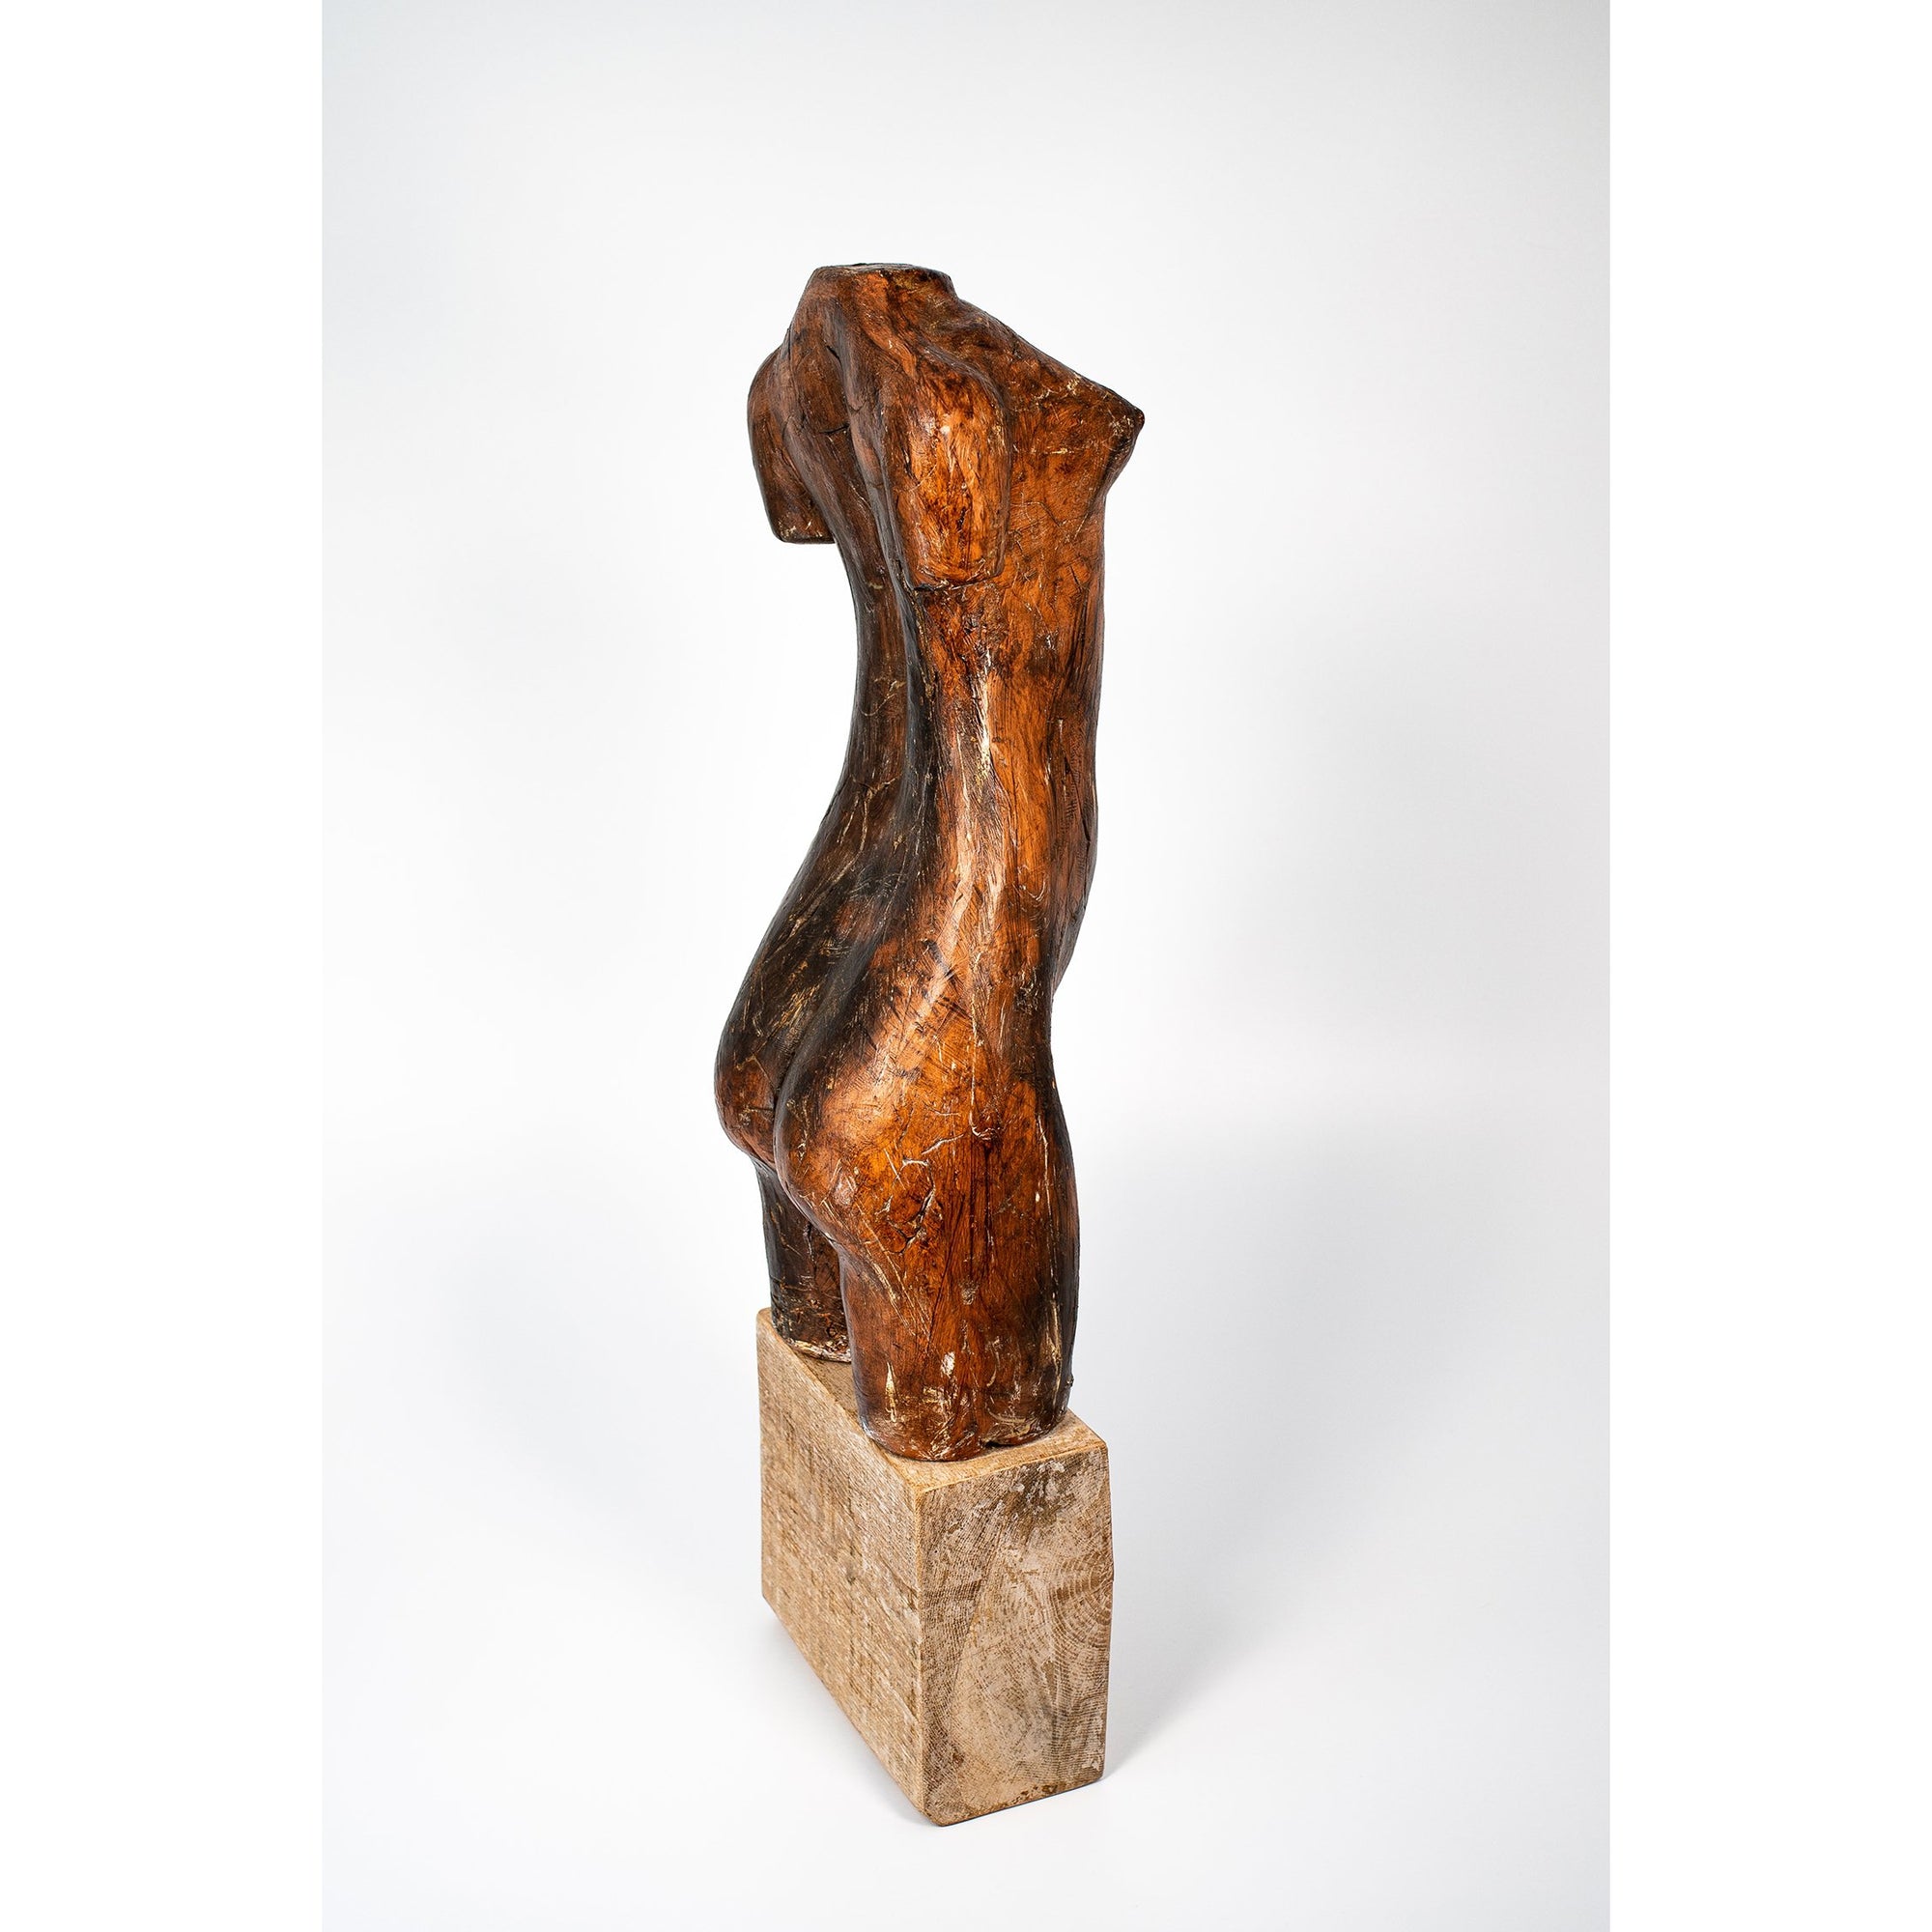 OK, Glazed terracotta standing figure on a block, by Sophie Howard, available from Padstow Gallery, Cornwall